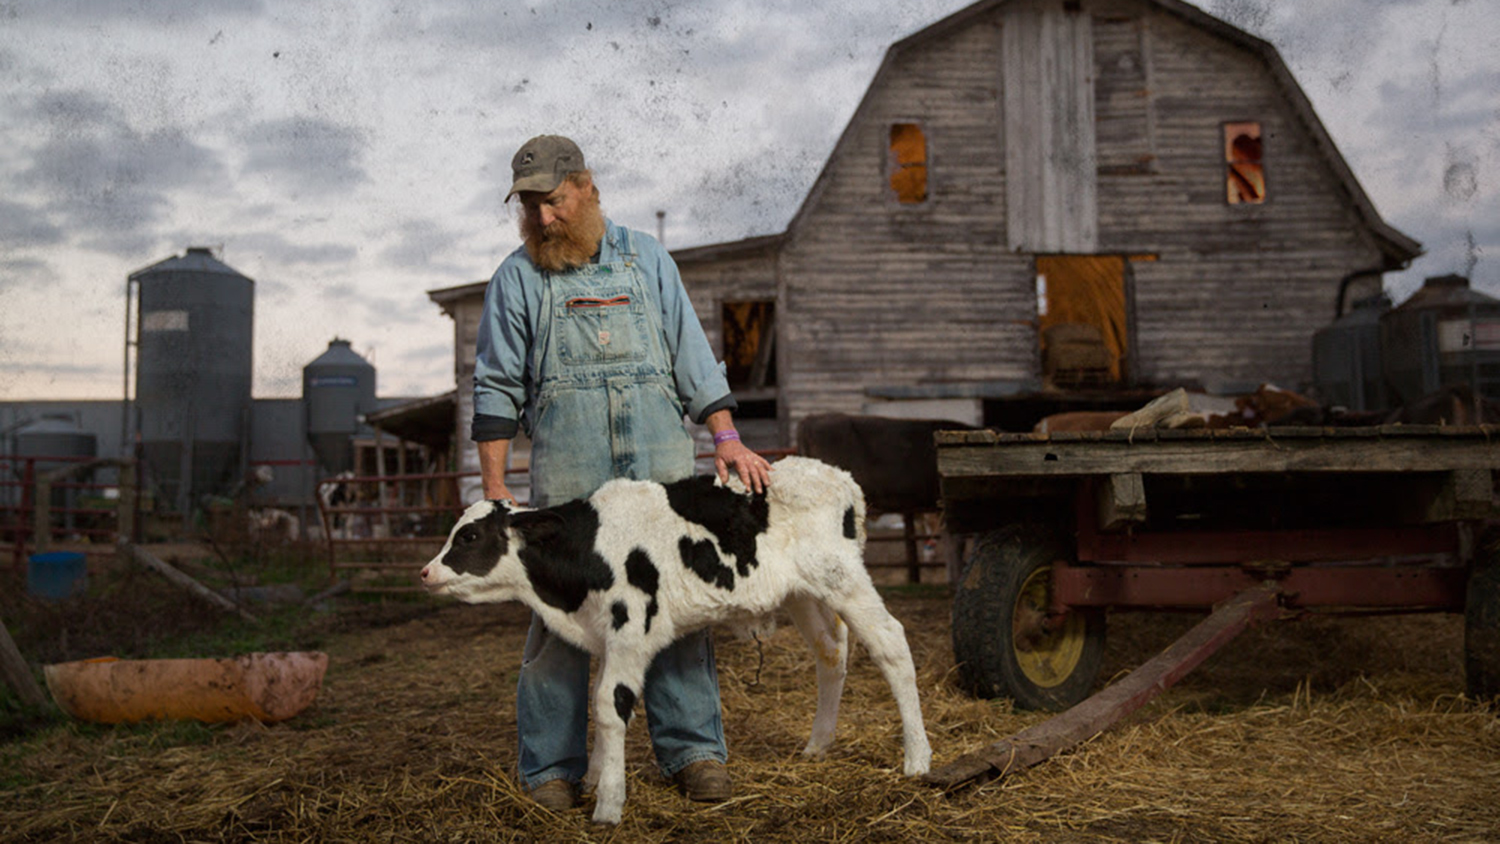 A man in overralls stands next to a cow, in front of a barn